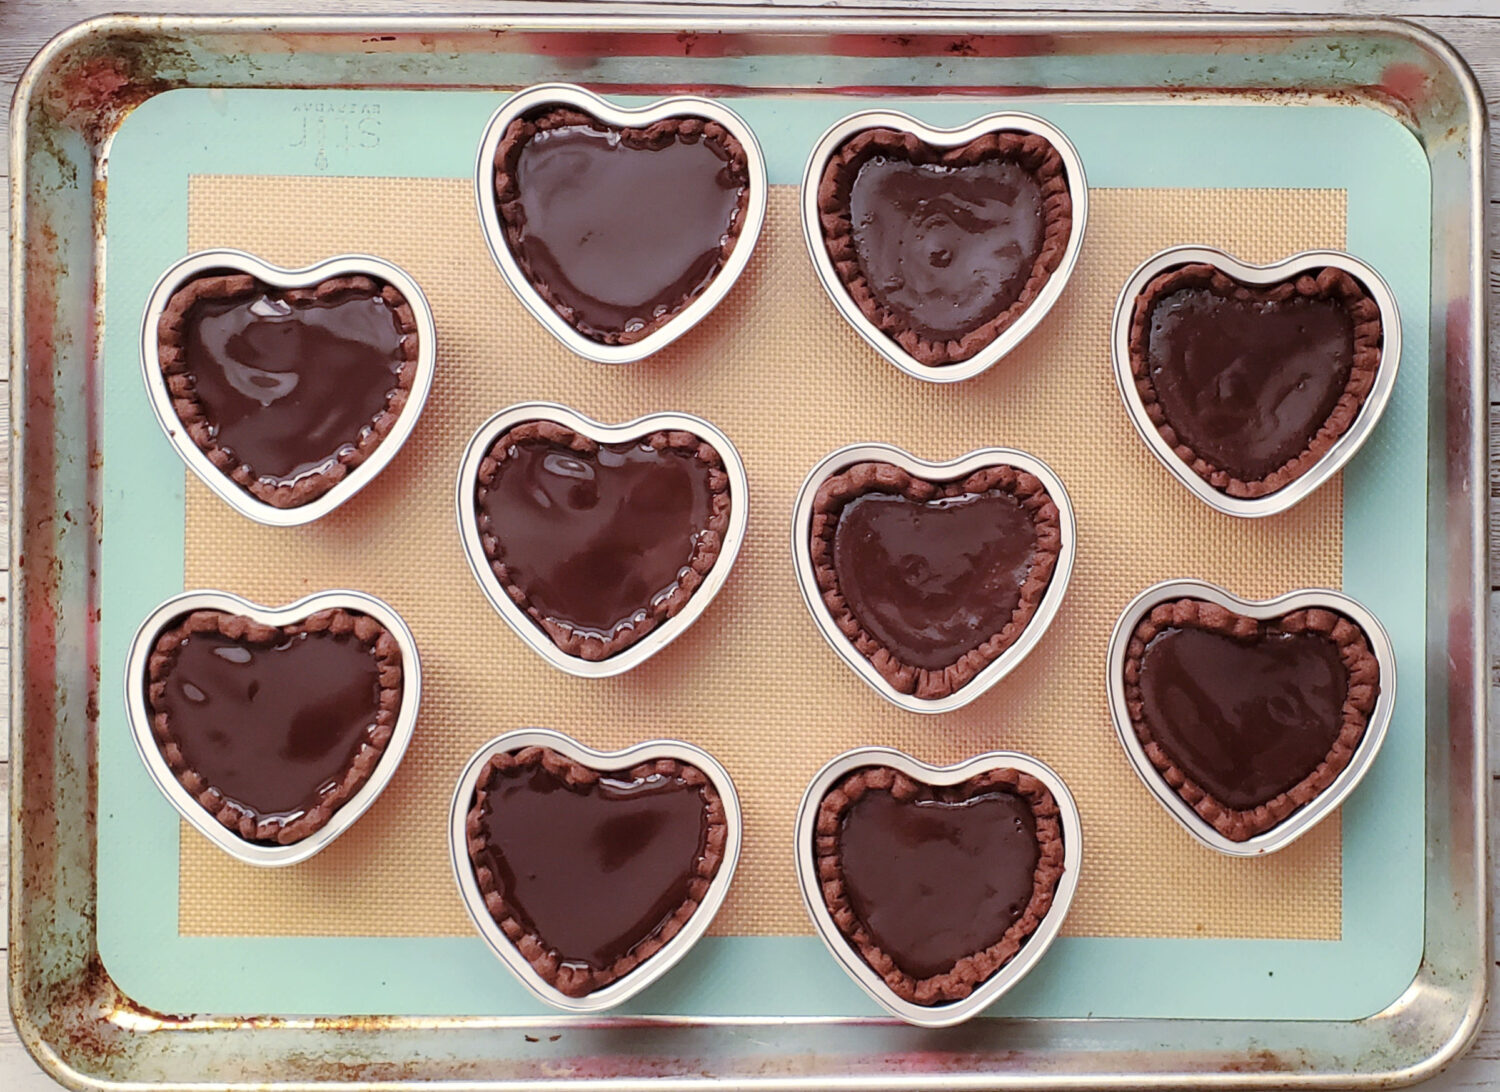 Decadent chocolate truffle filling in a dark chocolate crust, & a ganache glaze, baked into mini hearts. Perfect for Valentines Day!